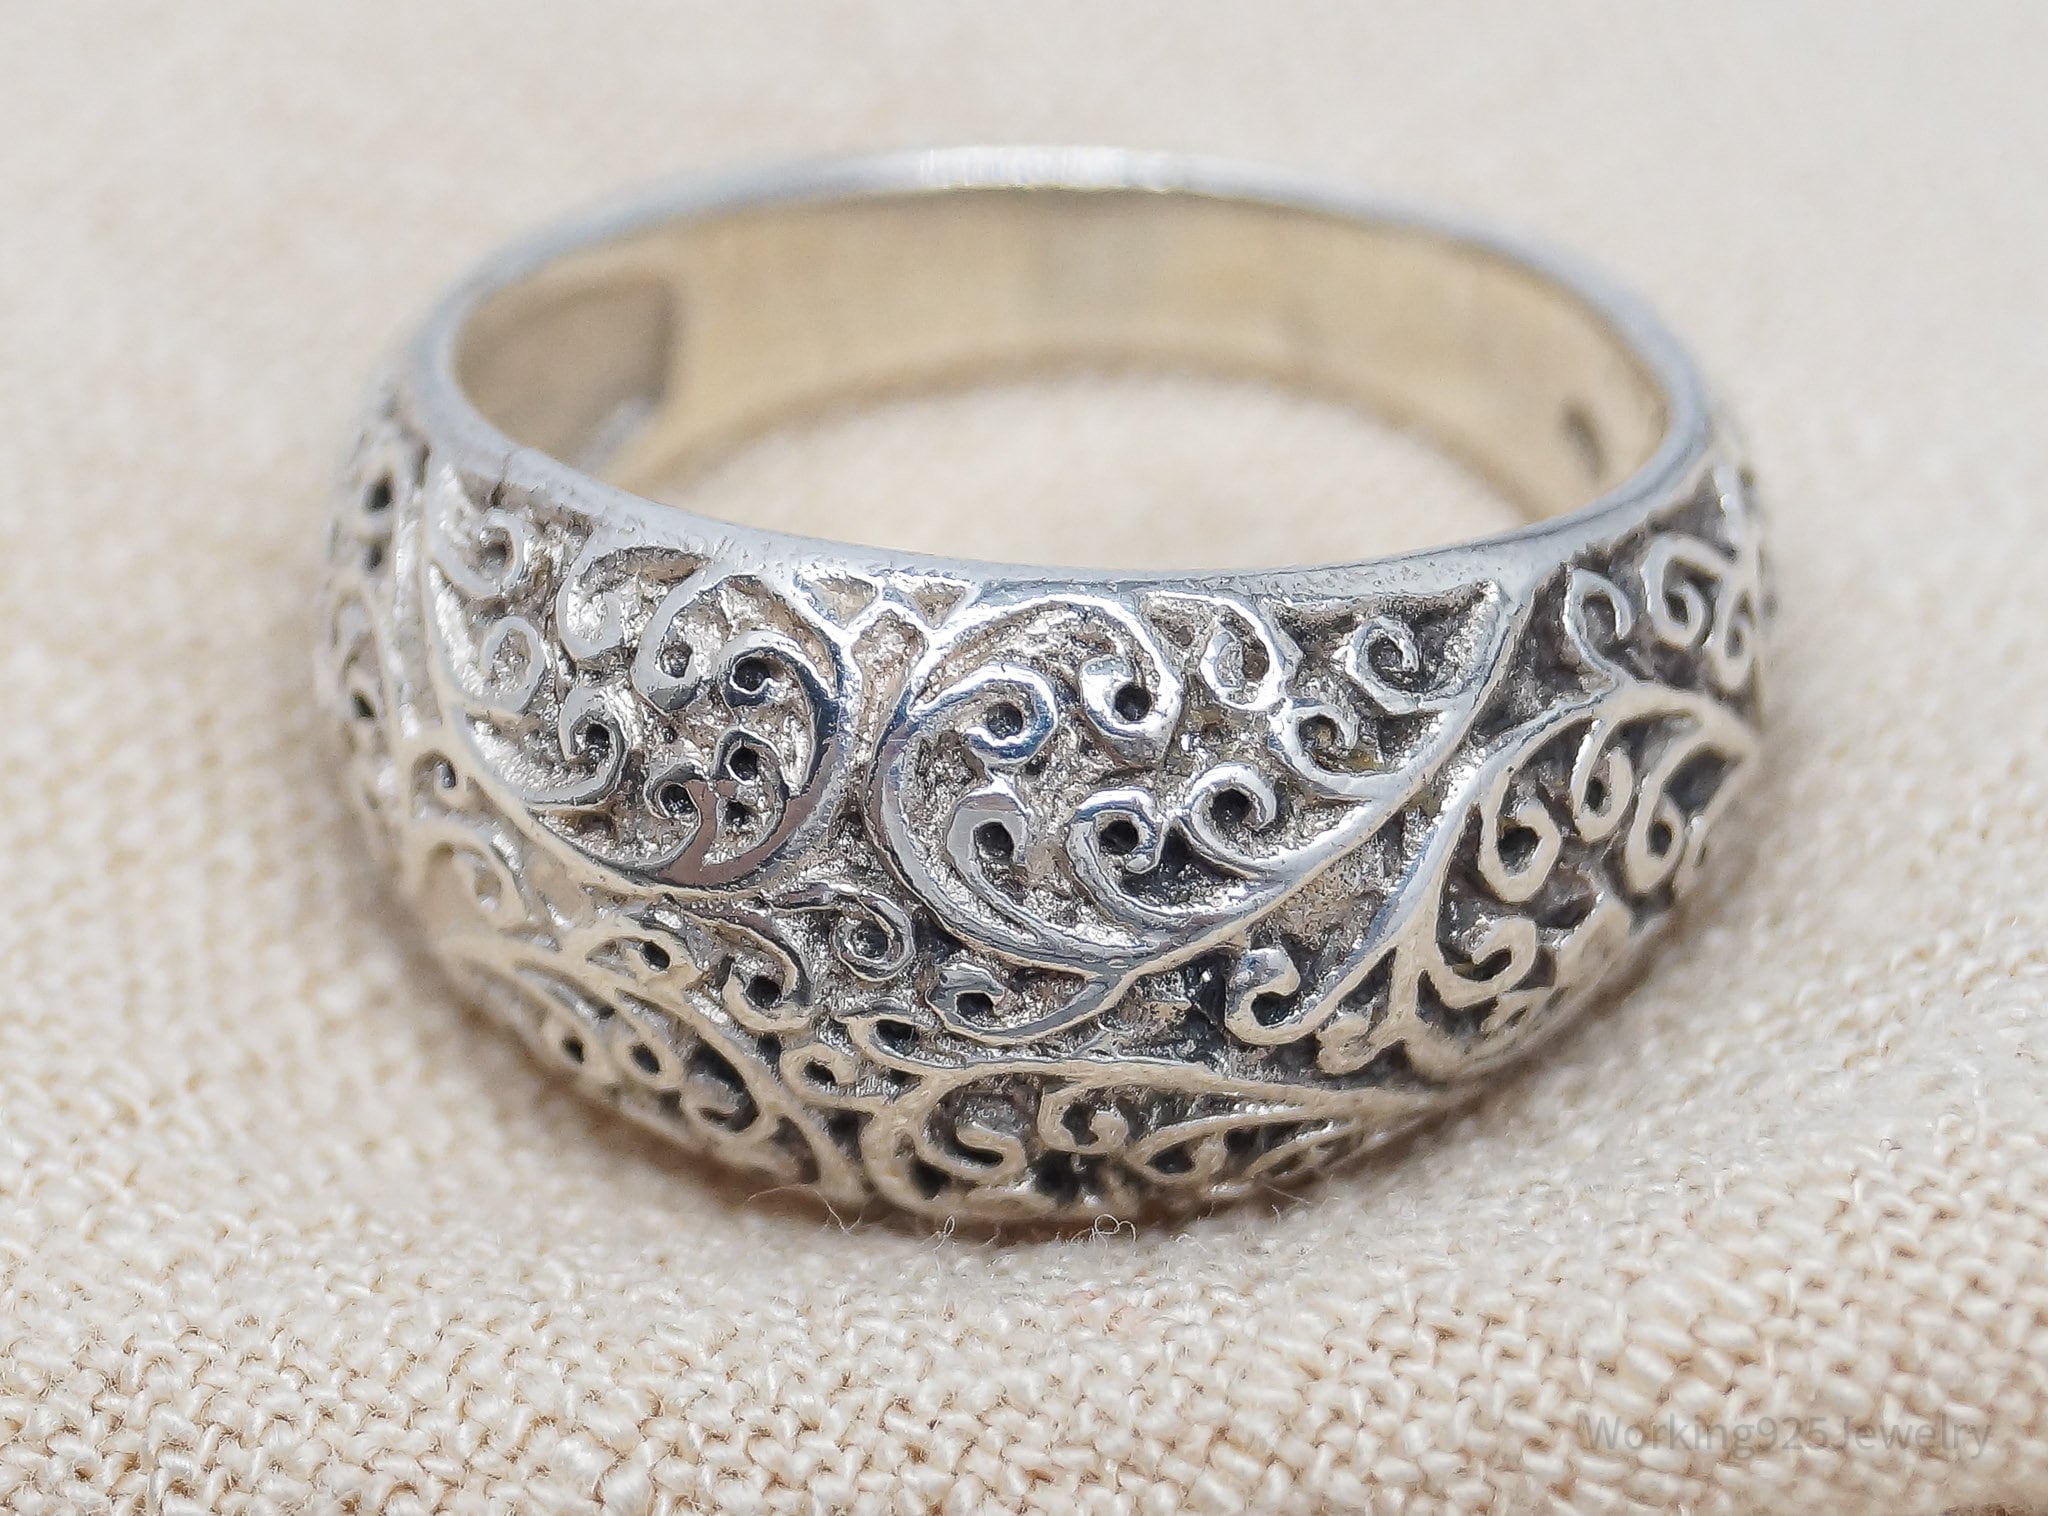 Vintage Swirl Scroll Sterling Silver Ring - Size 6.5